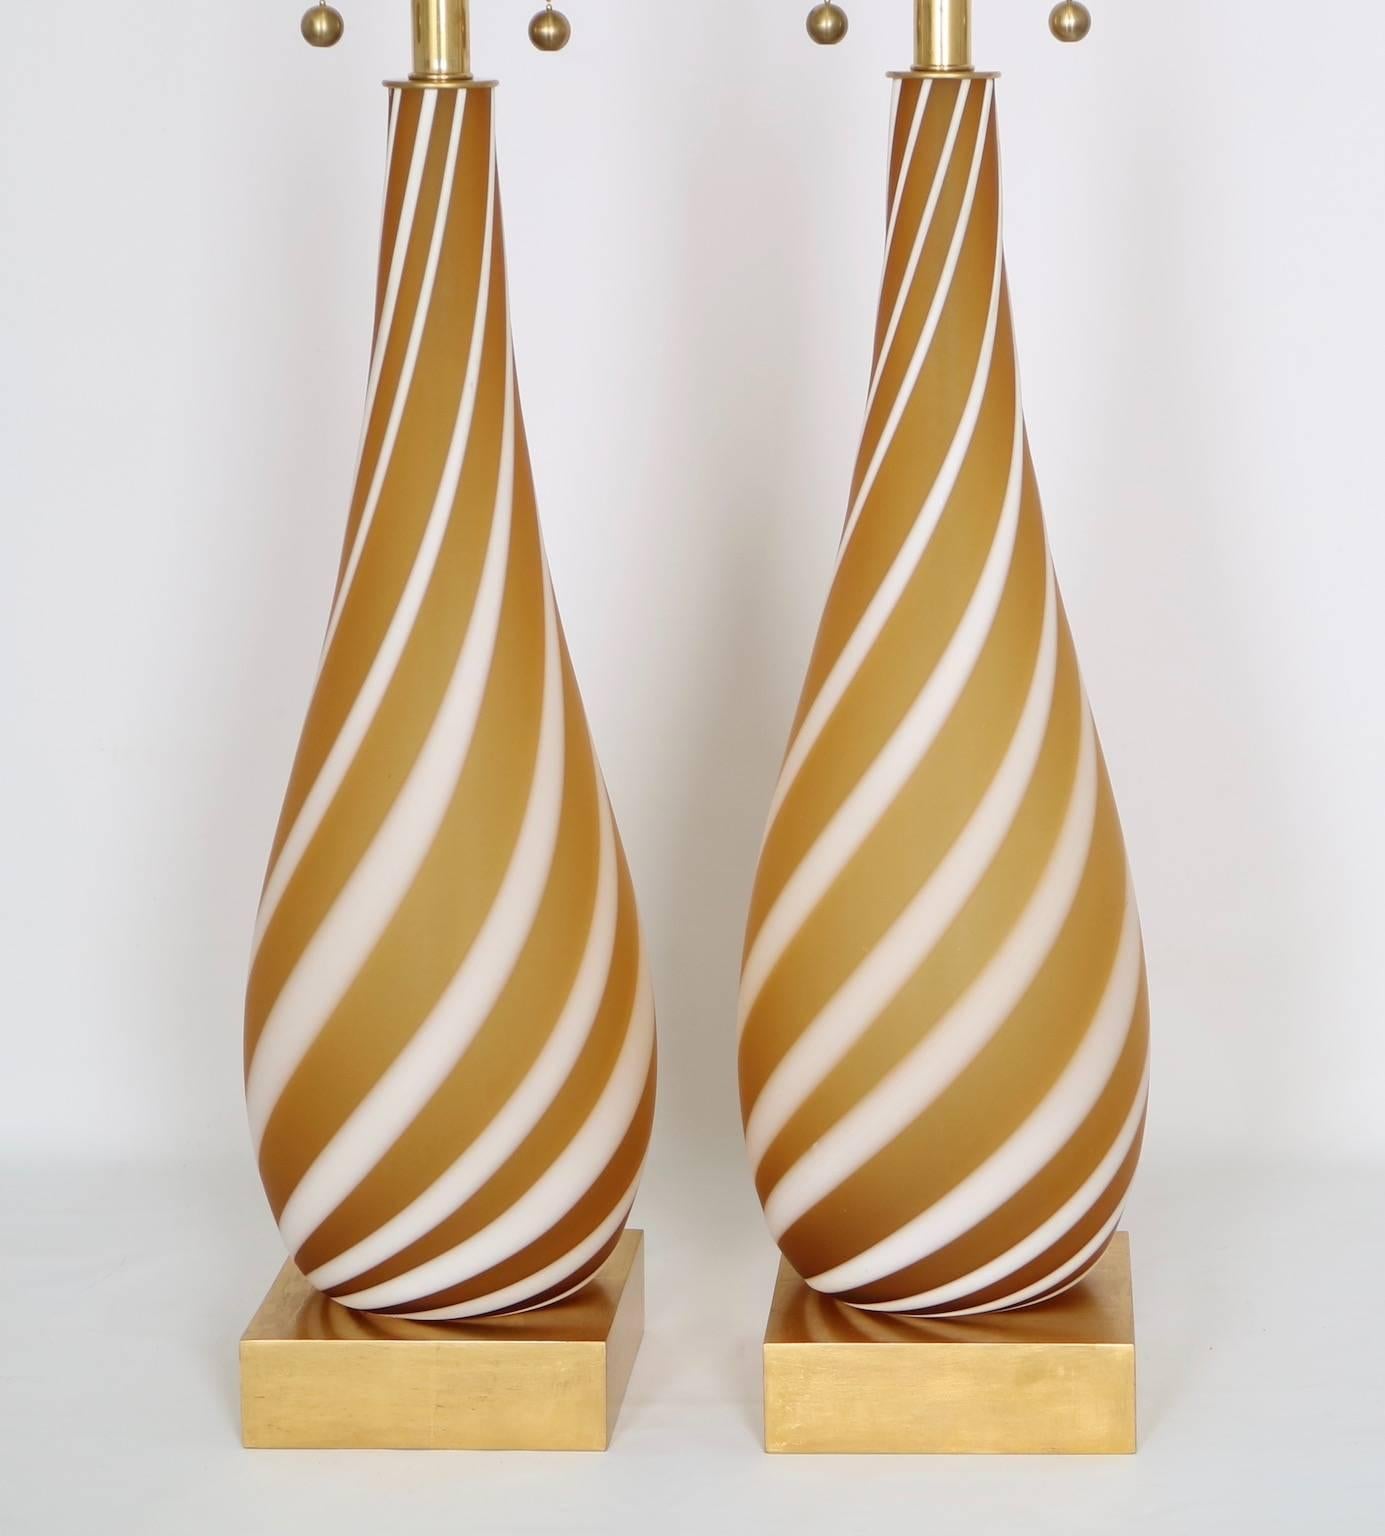 Pair of Murano Glass Lamps in Butterscotch and White (Italienisch)